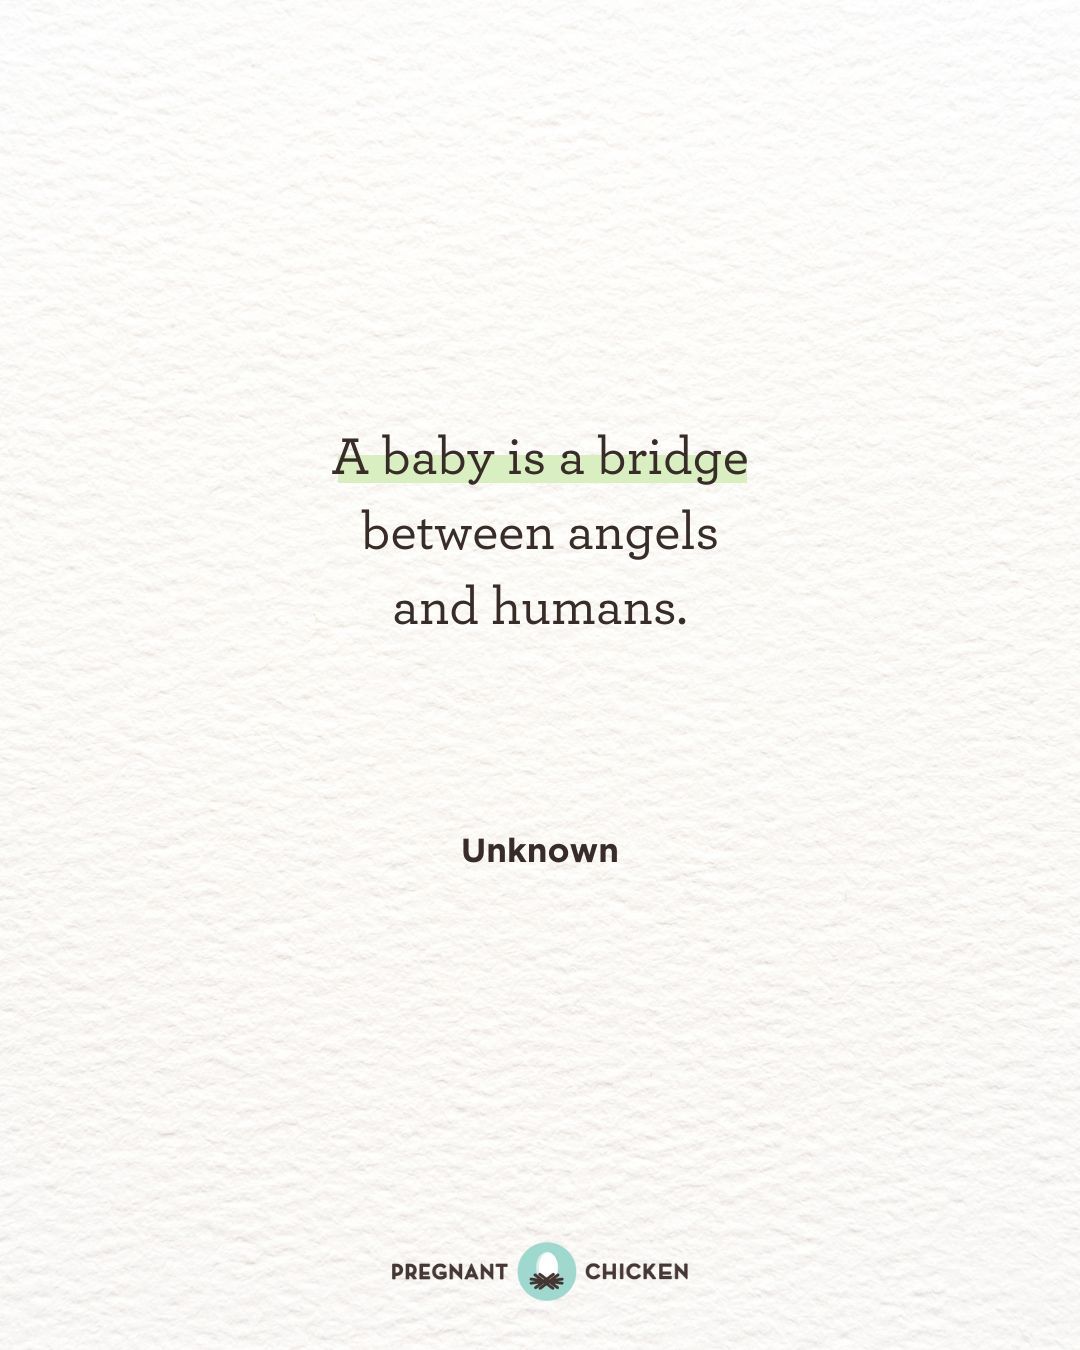 A baby is a bridge between angels and humans.